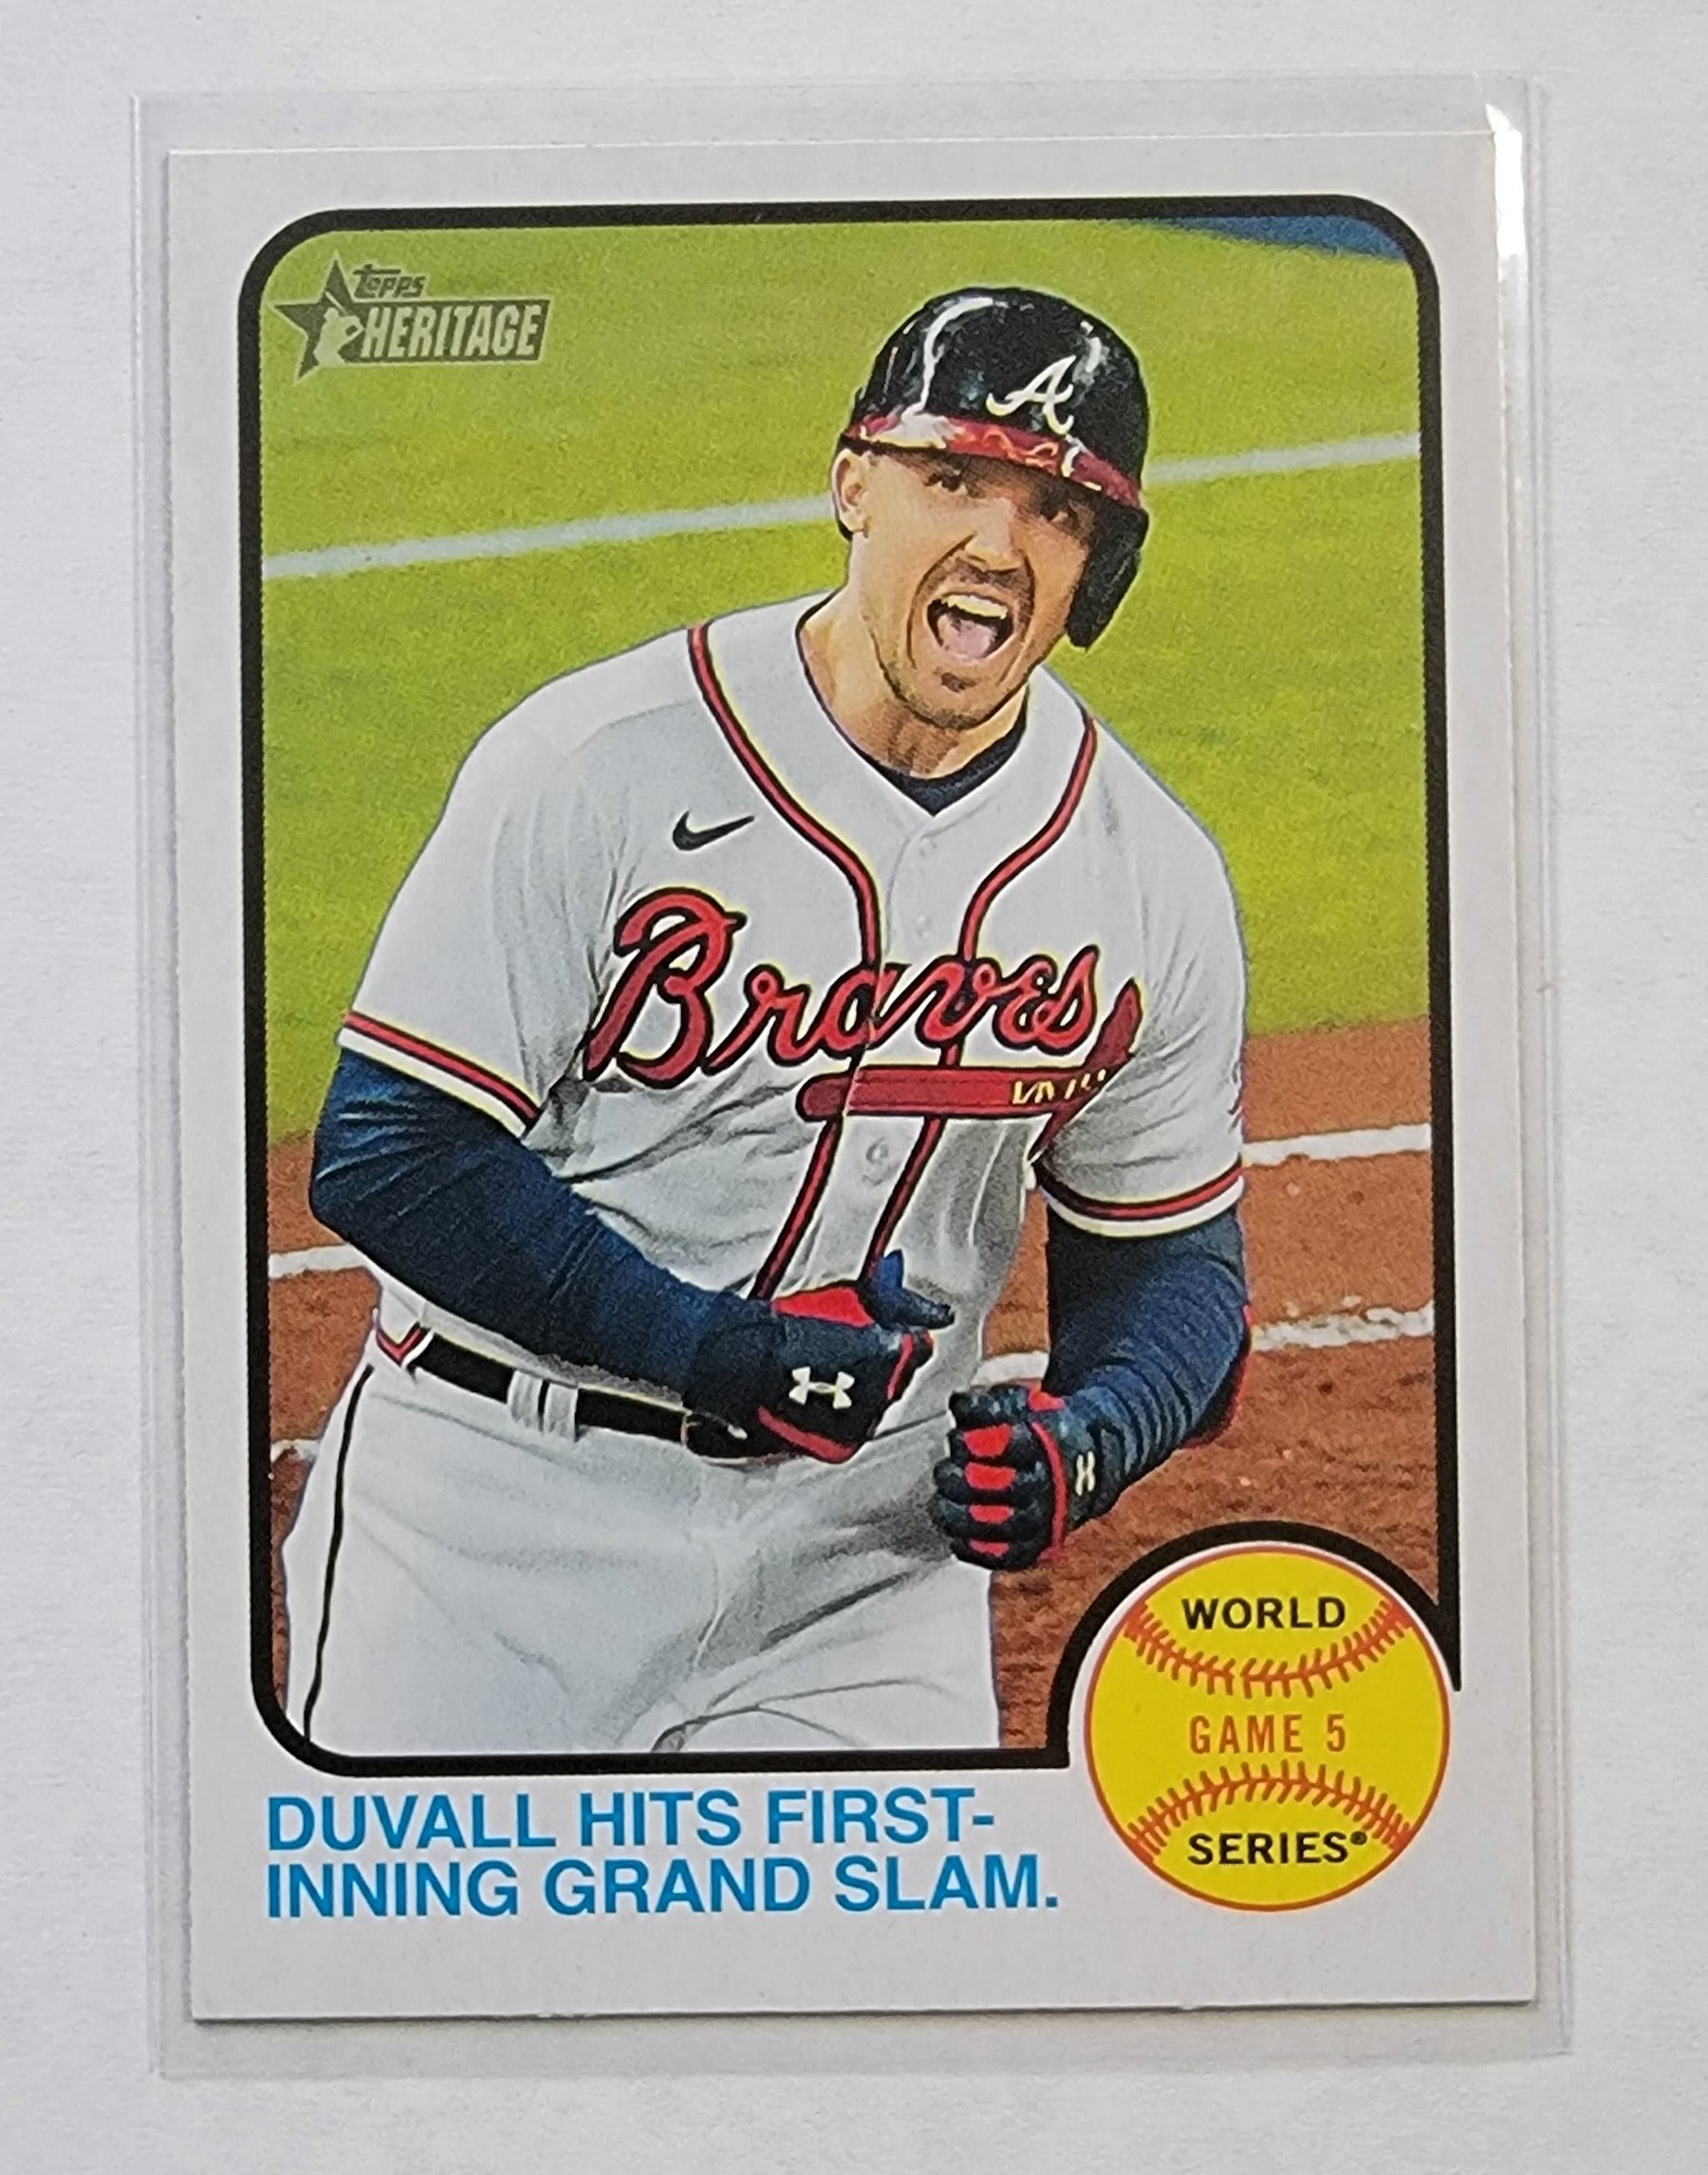 2022 Topps Heritage Adam Duvall Hits 1st Inning Grand Slam Insert Baseball Card AVM1 simple Xclusive Collectibles   